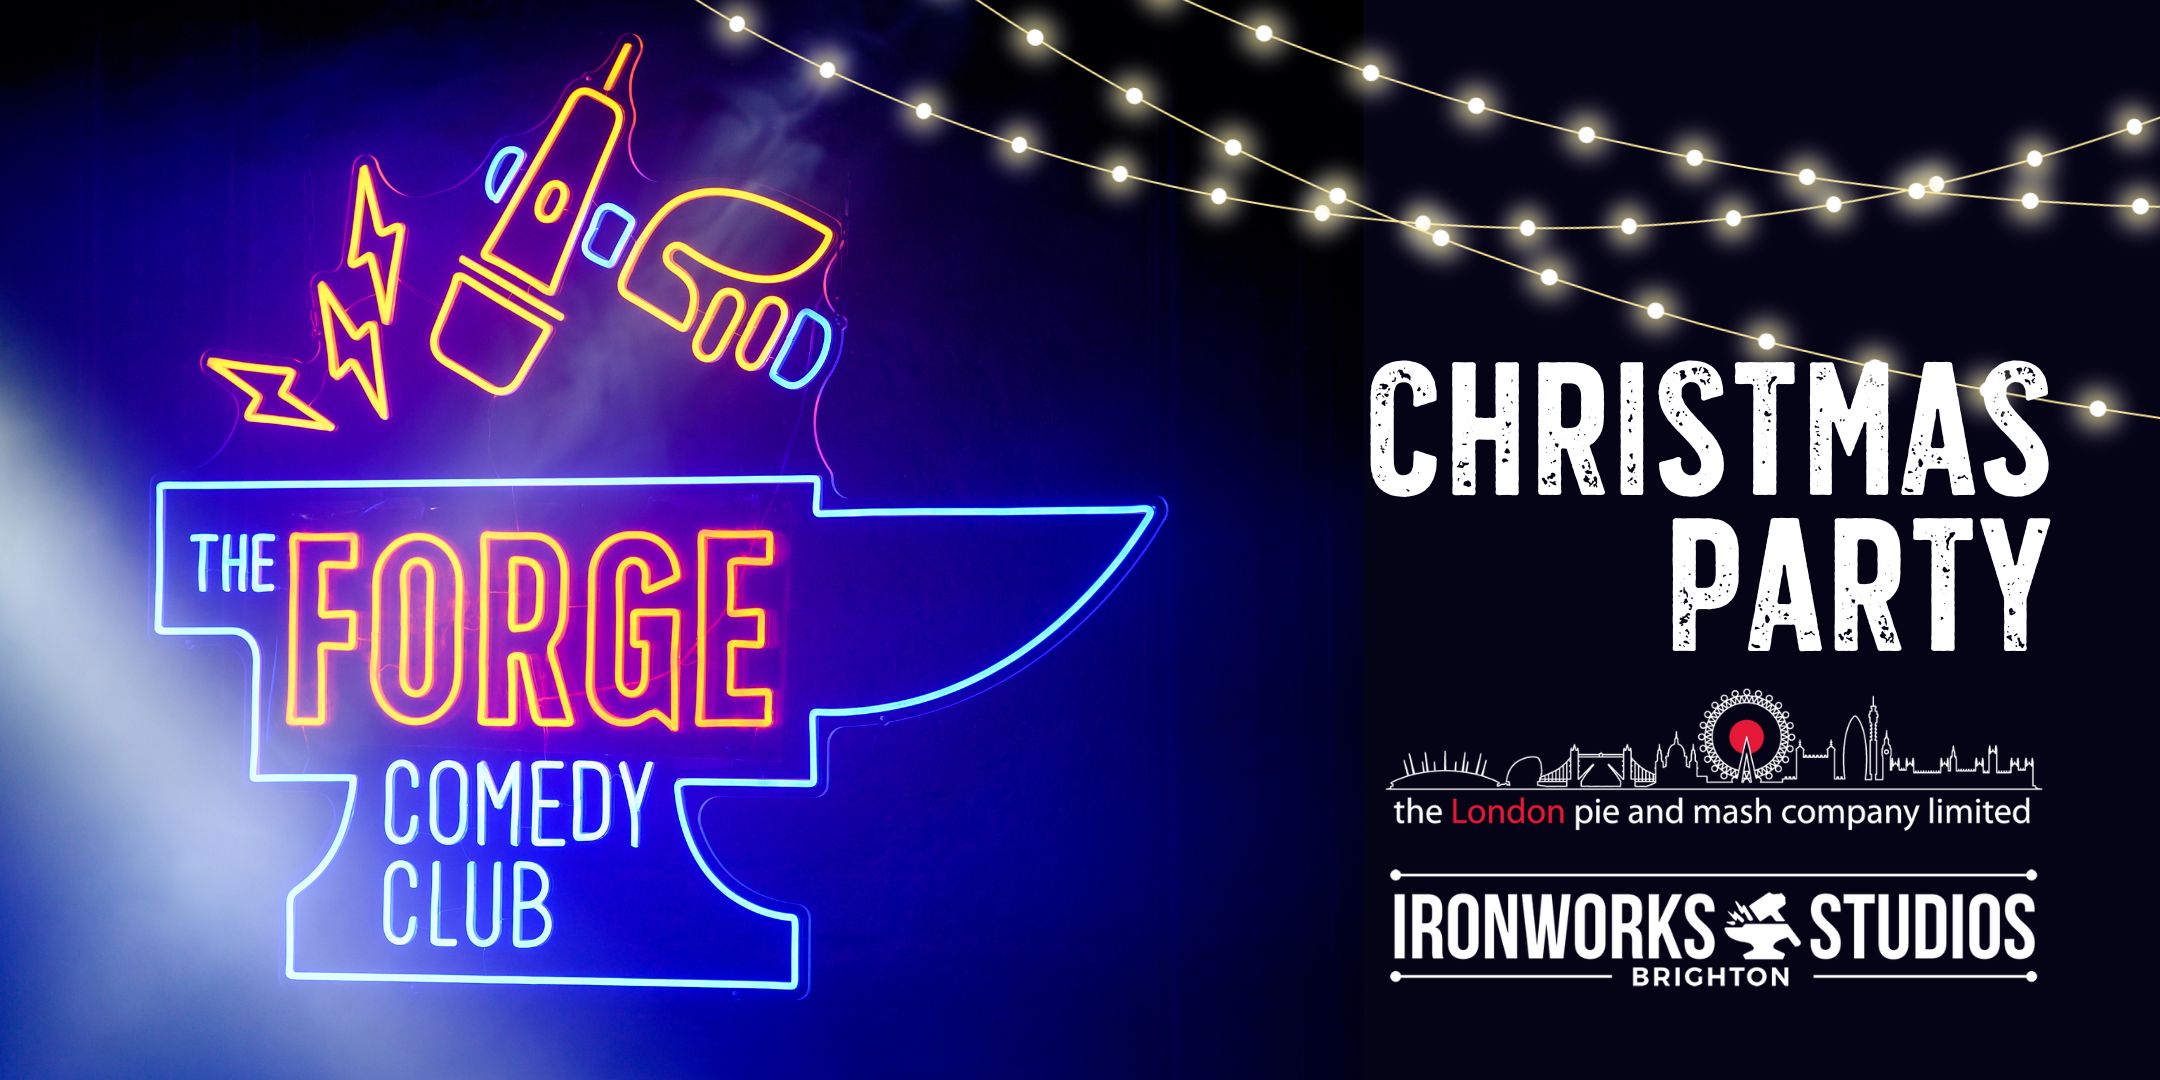 23rd December: The Forge Comedy Club Christmas Party